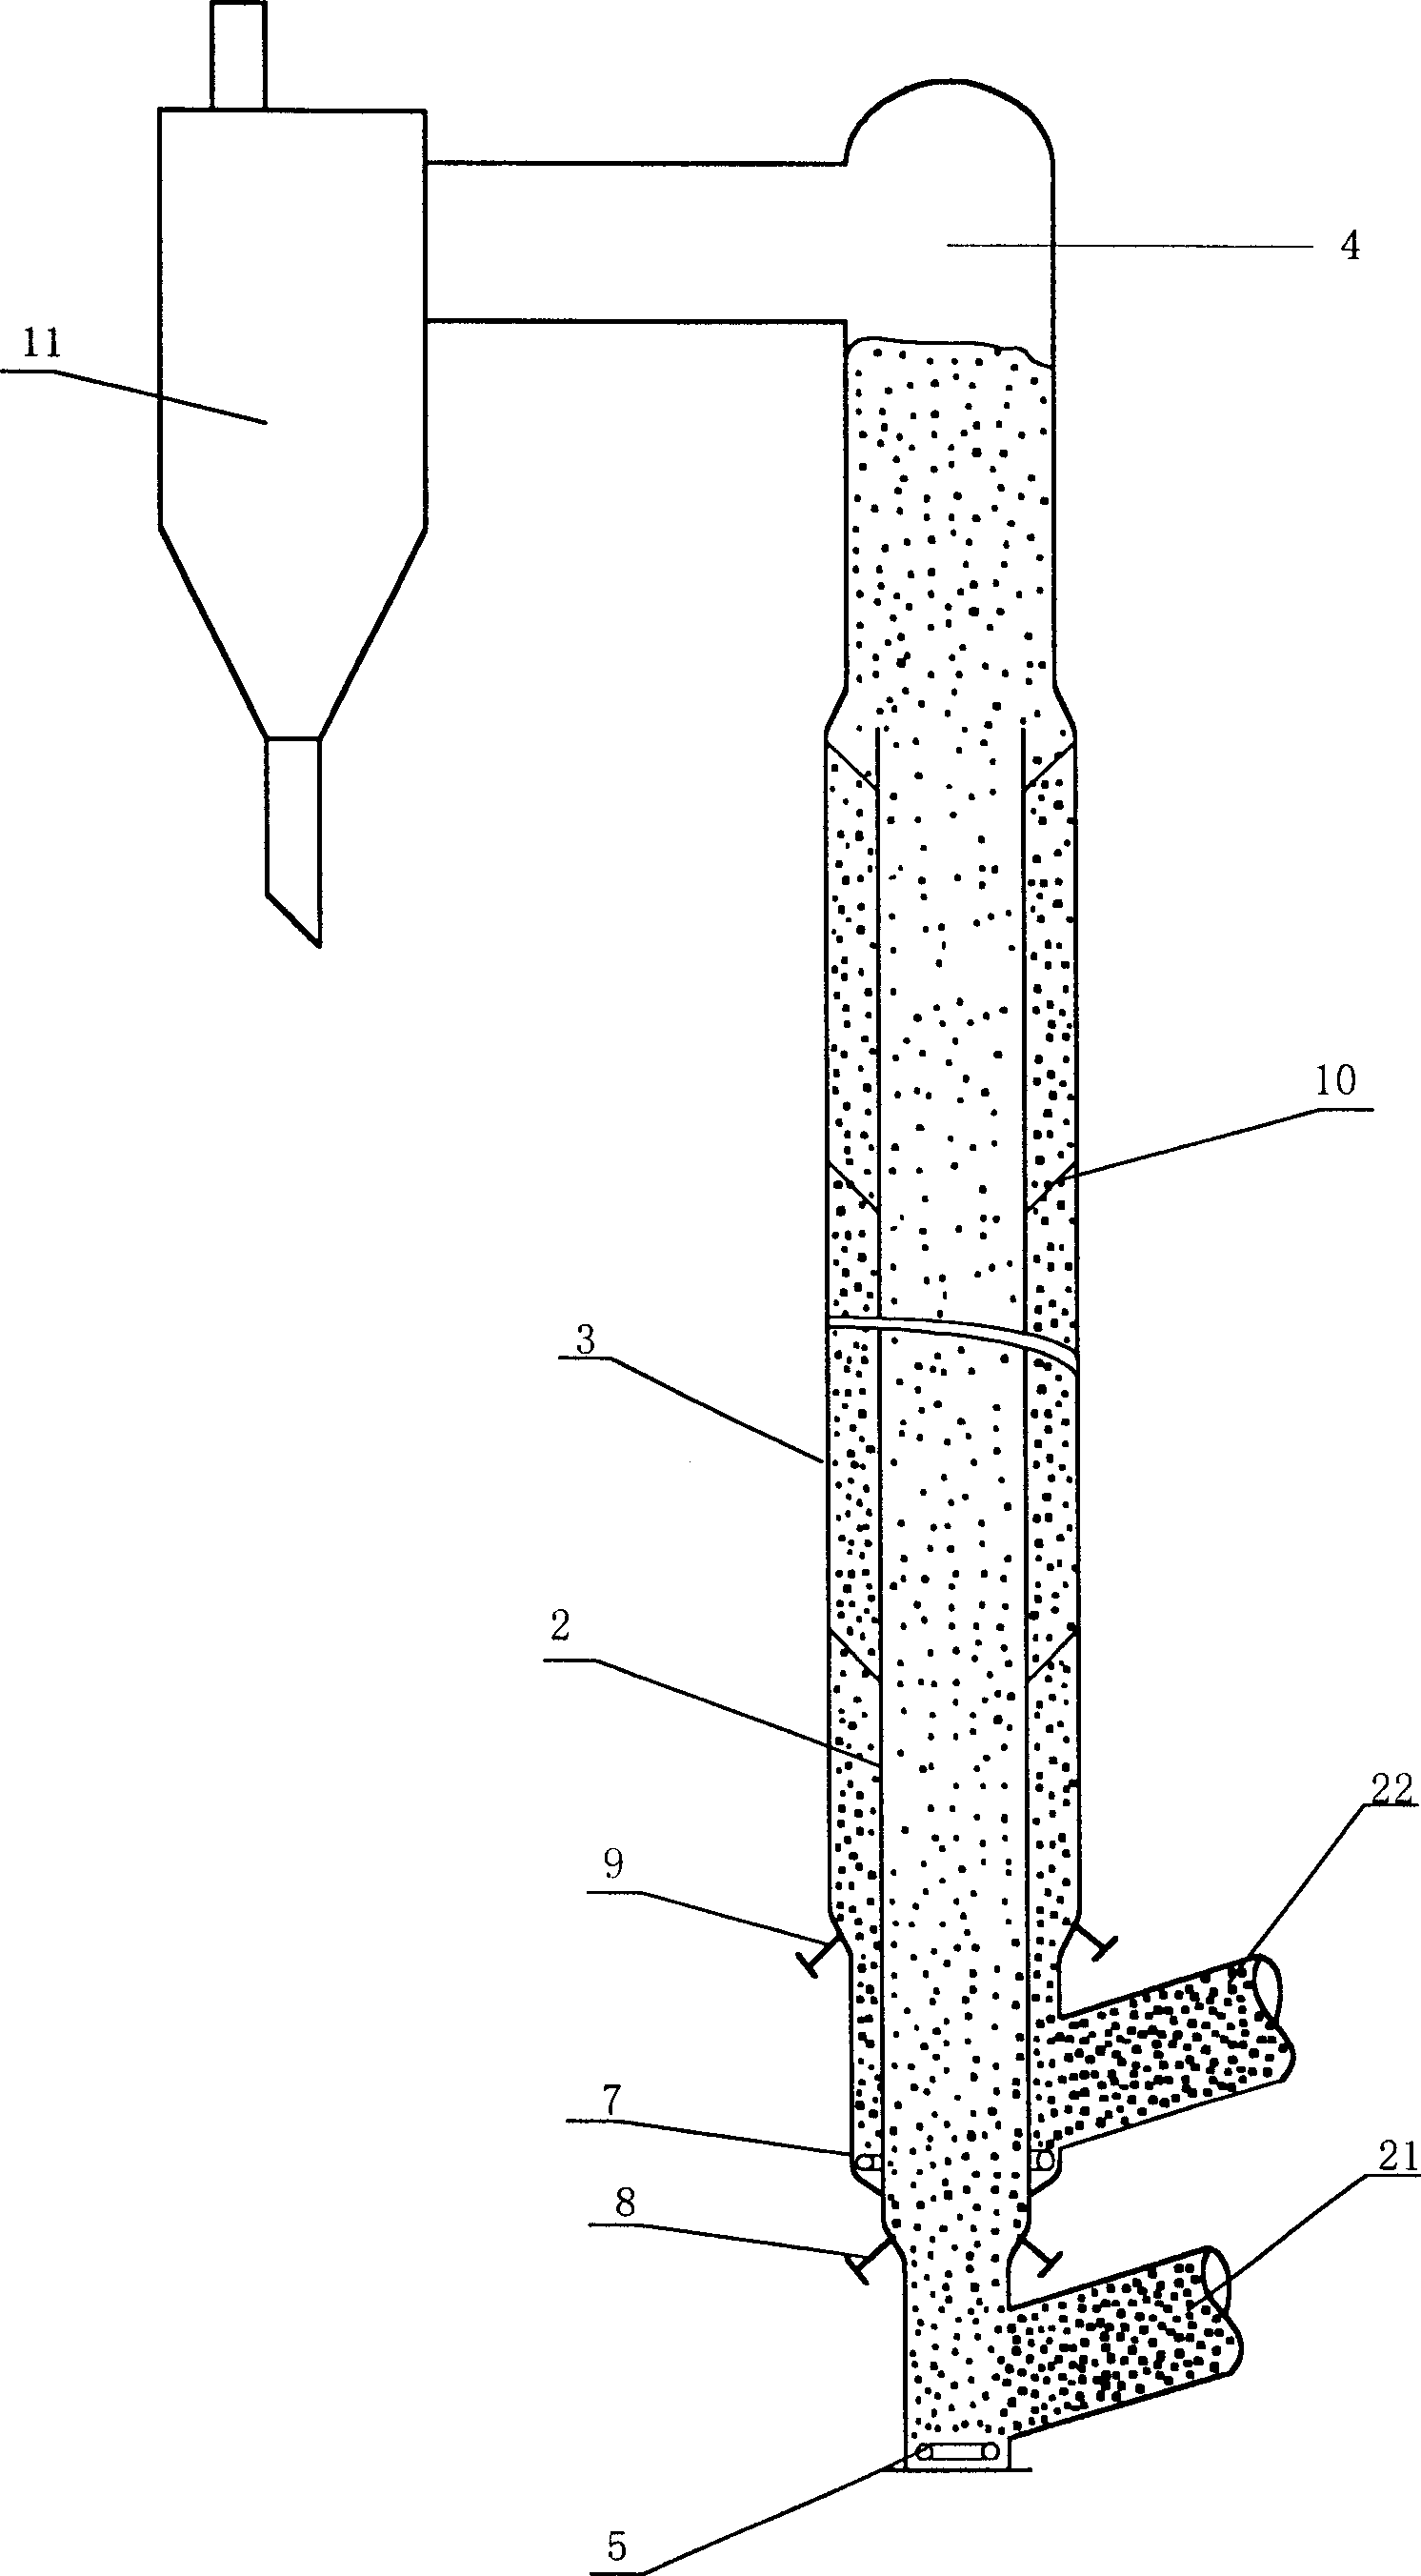 Method for catalyzing and cracking petroleum hydrocarbon in relaying mode